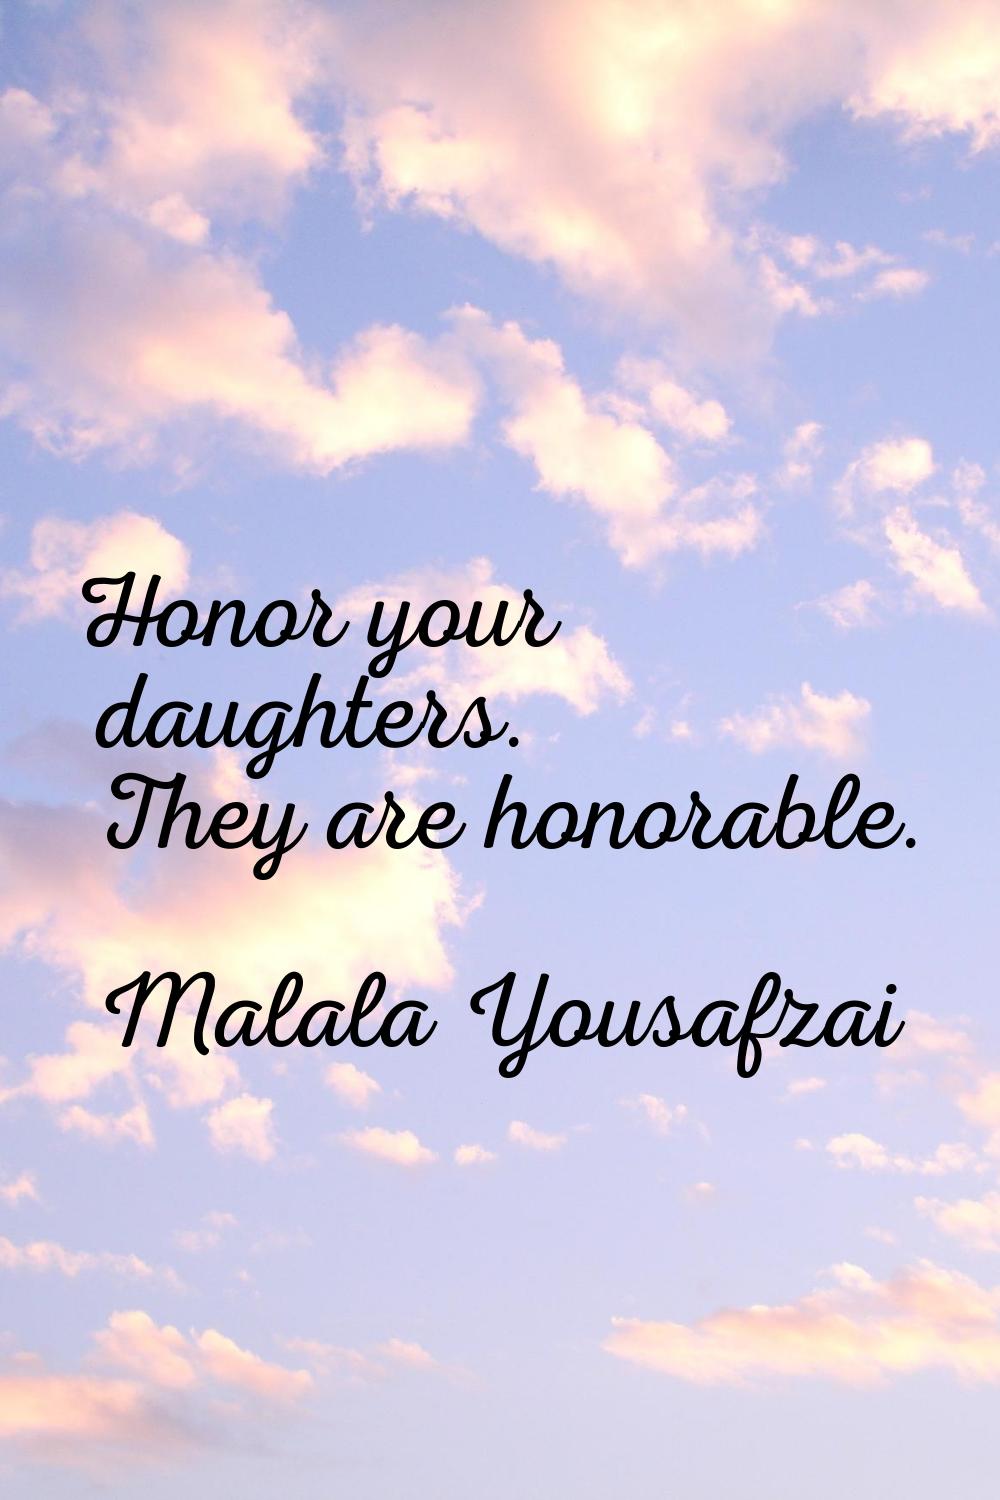 Honor your daughters. They are honorable.